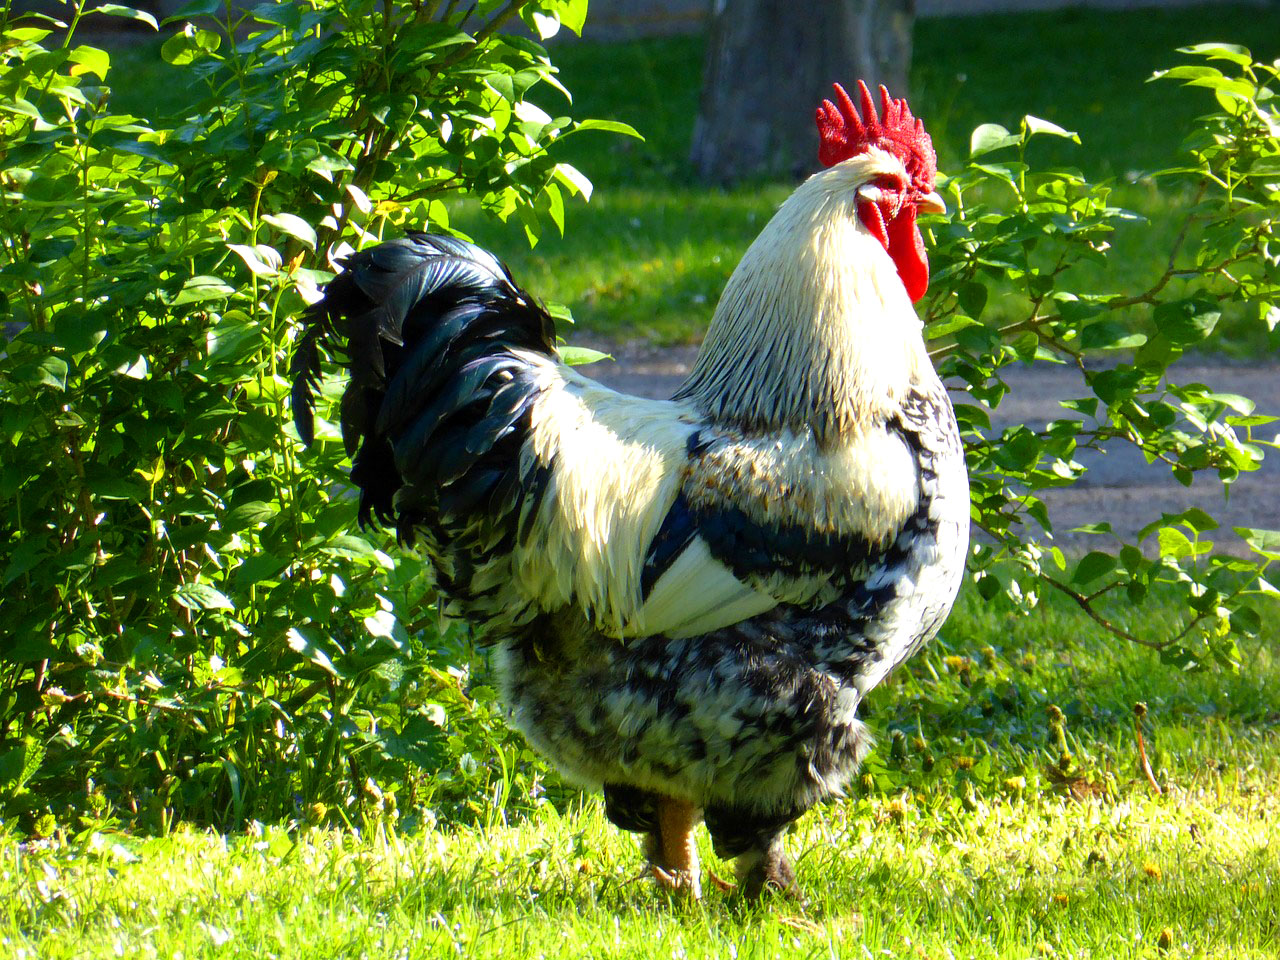 Rooster on the Lawn